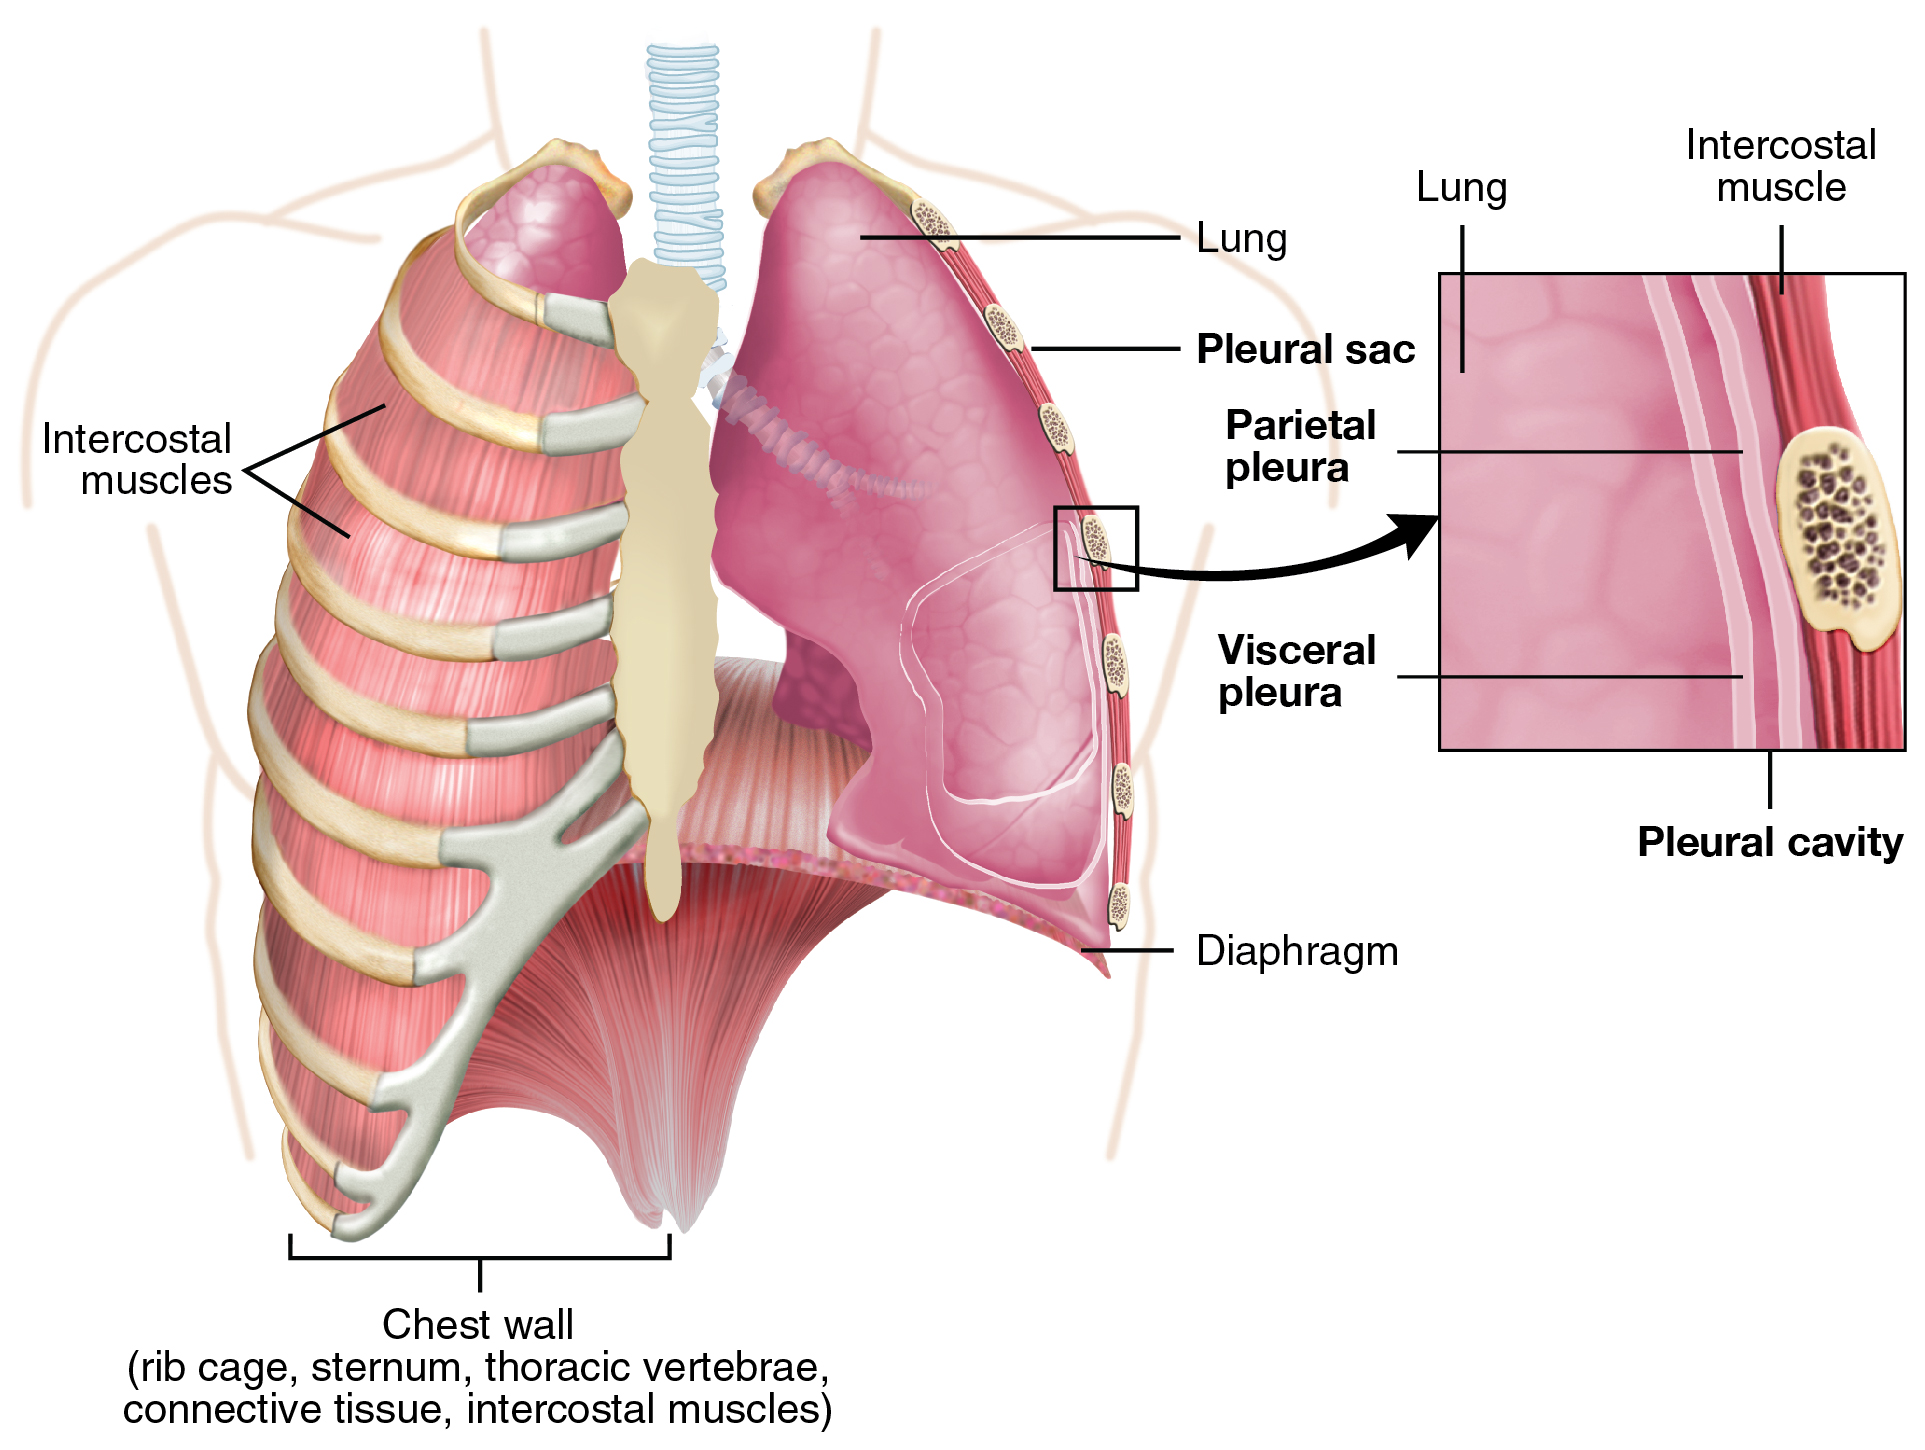 Diagram of the pleurae of the lungs. The parietal pleura lines the inside of the rib cage while the visceral pleura covers the superficial surface of the lobes of the lungs.